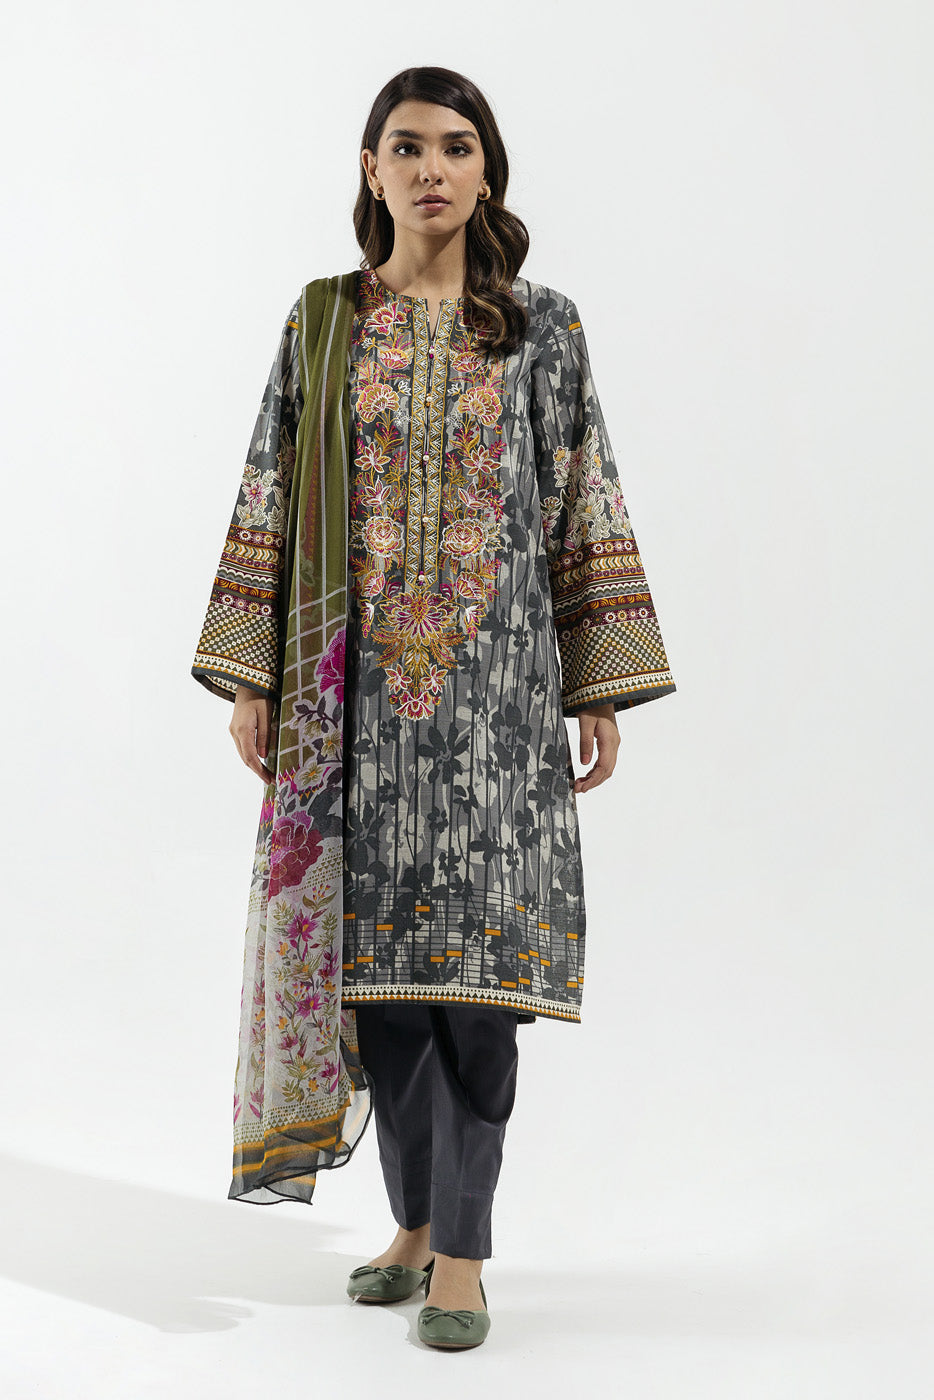 2 PIECE - EMBROIDERED KHADDAR SUIT - GRAPHITE BLISS (UNSTITCHED) - BEECHTREE